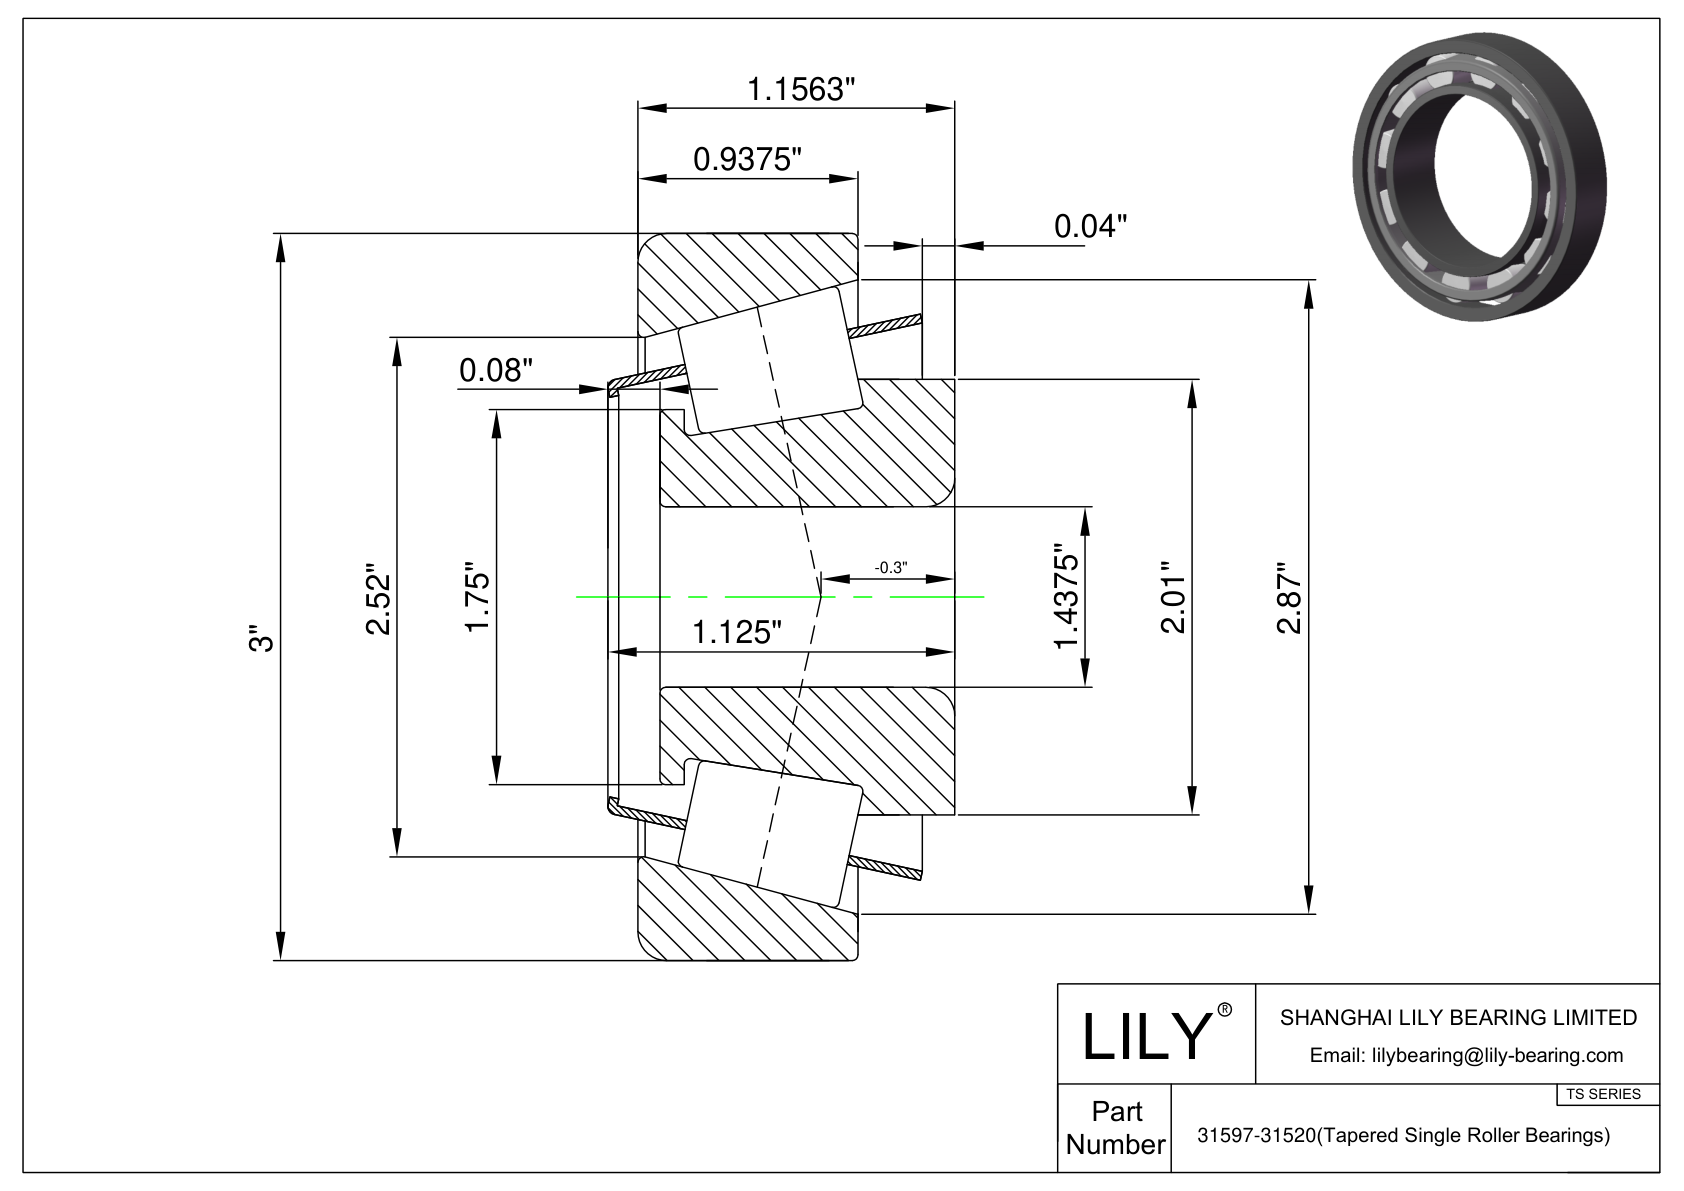 31597-31520 TS (Tapered Single Roller Bearings) (Imperial) cad drawing